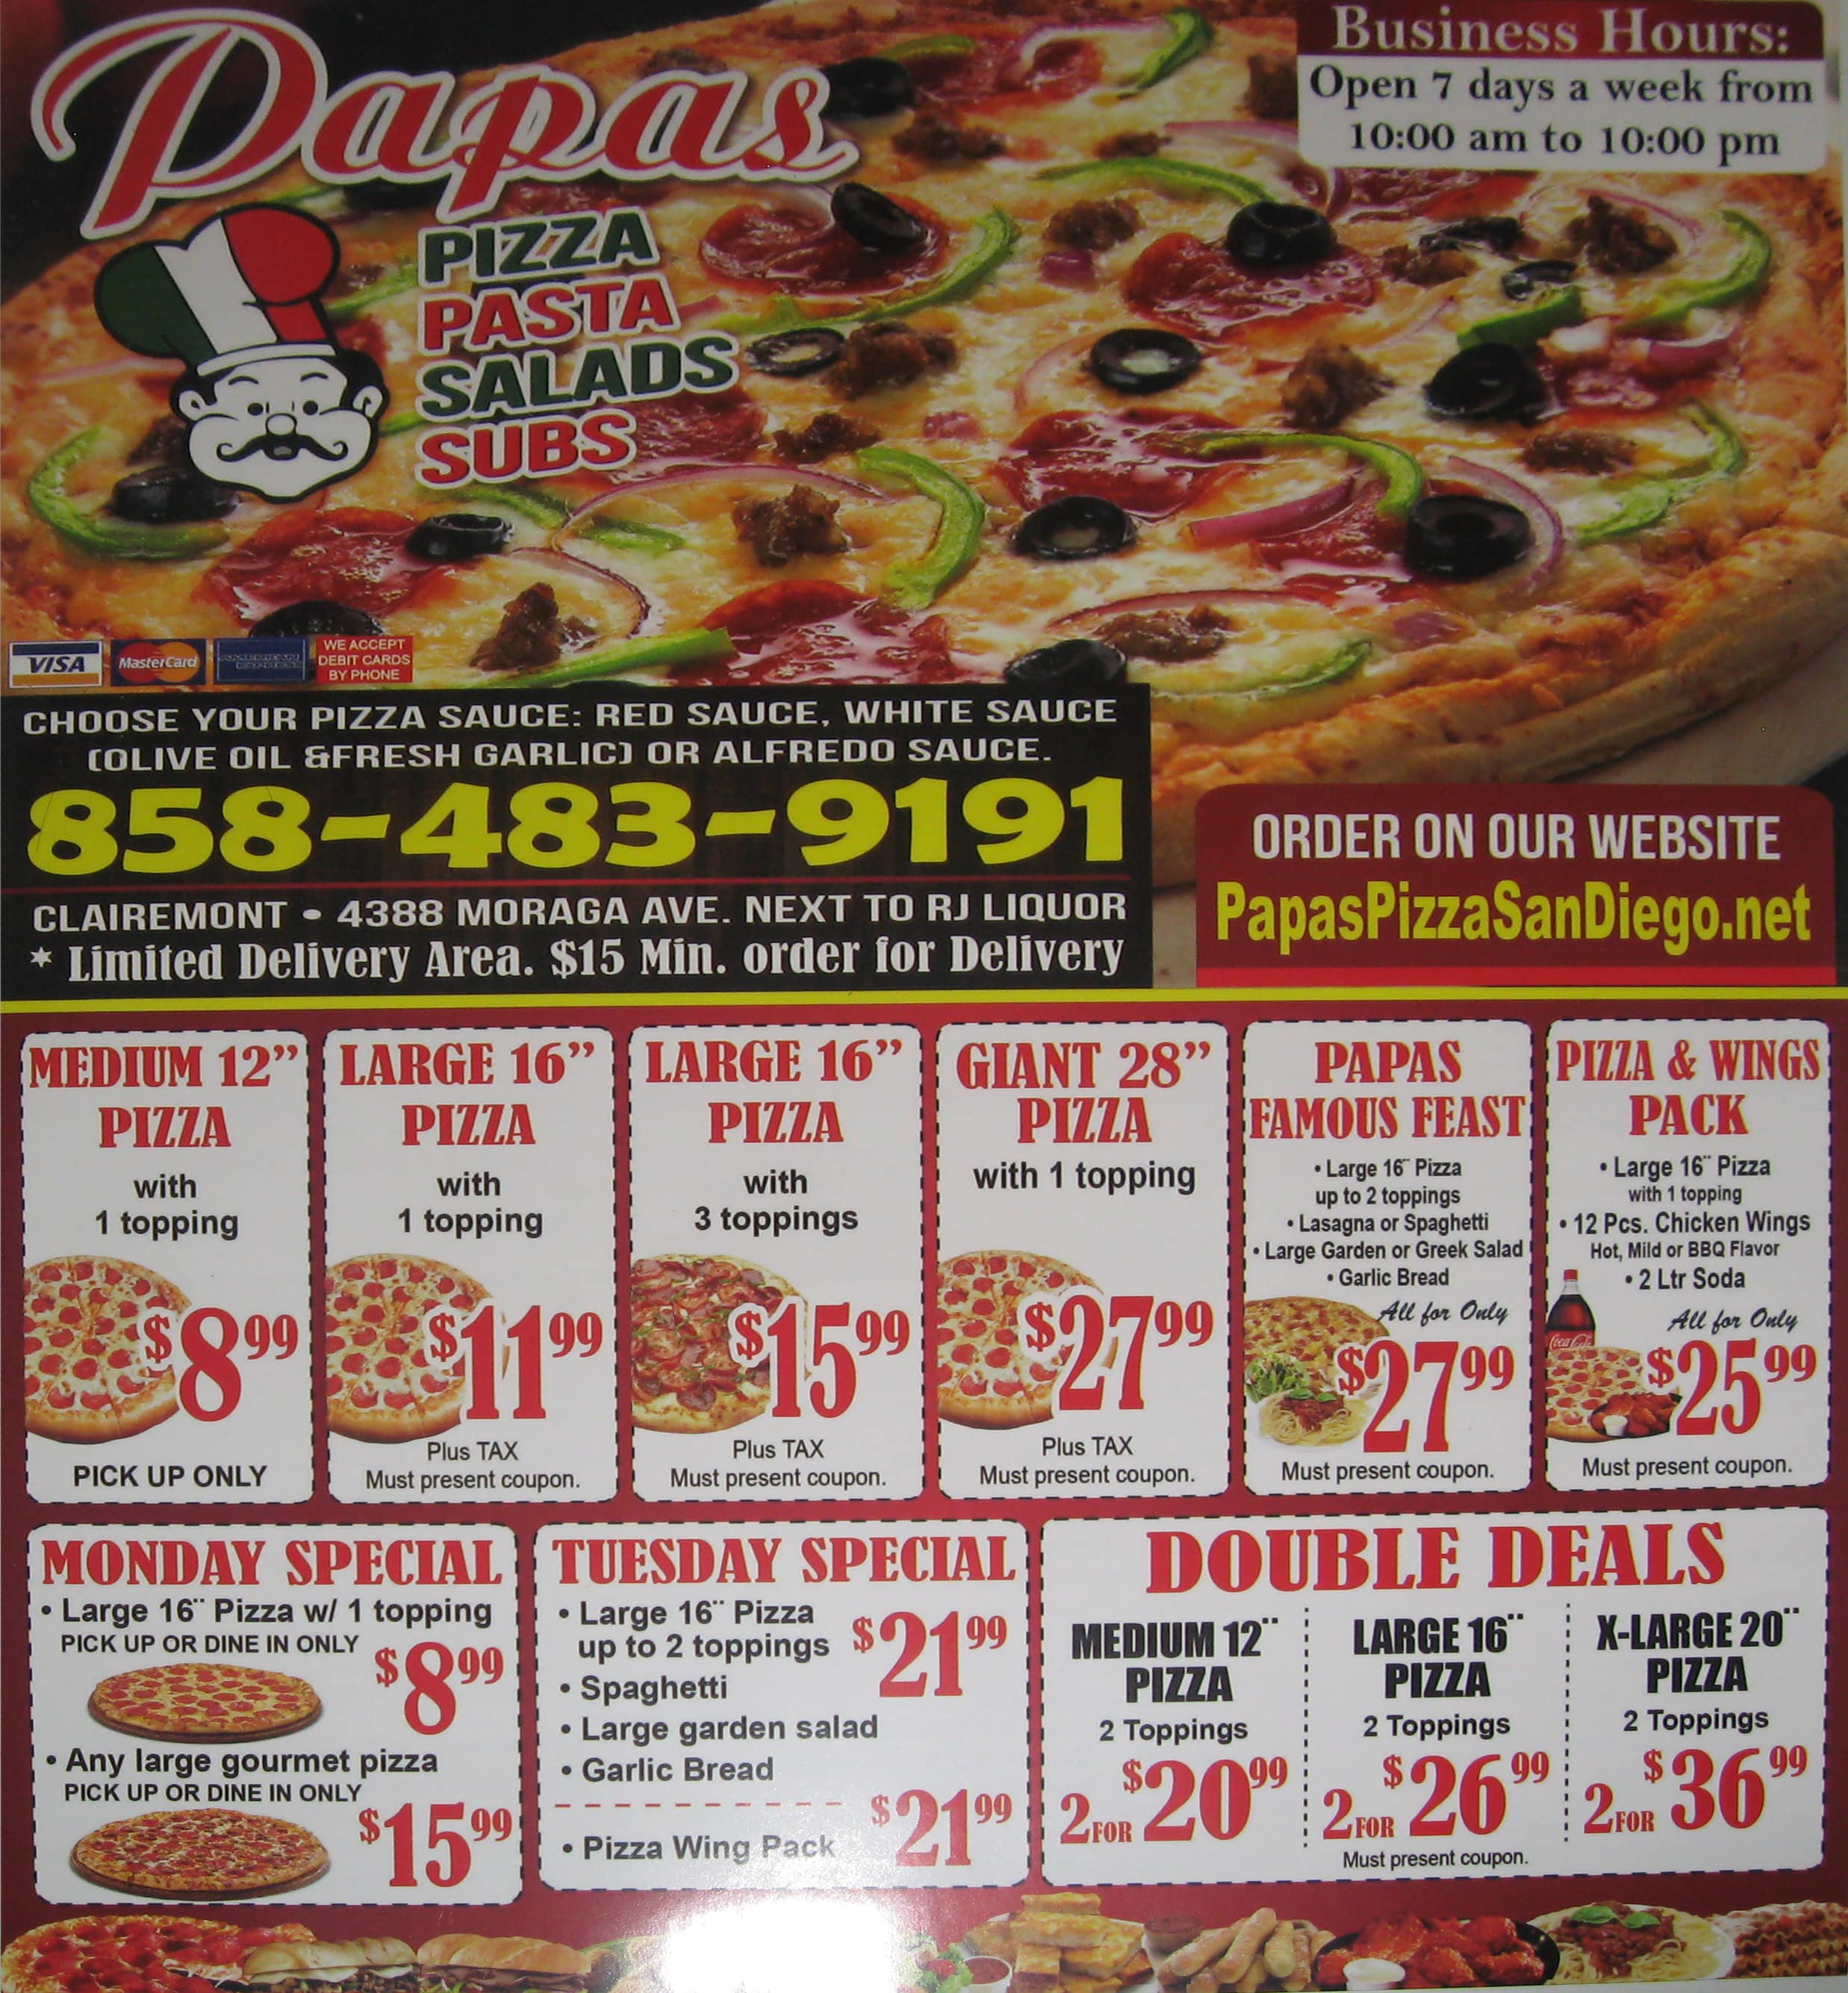 Papa's Pizza, Best Take-Out Pizza Restaurant